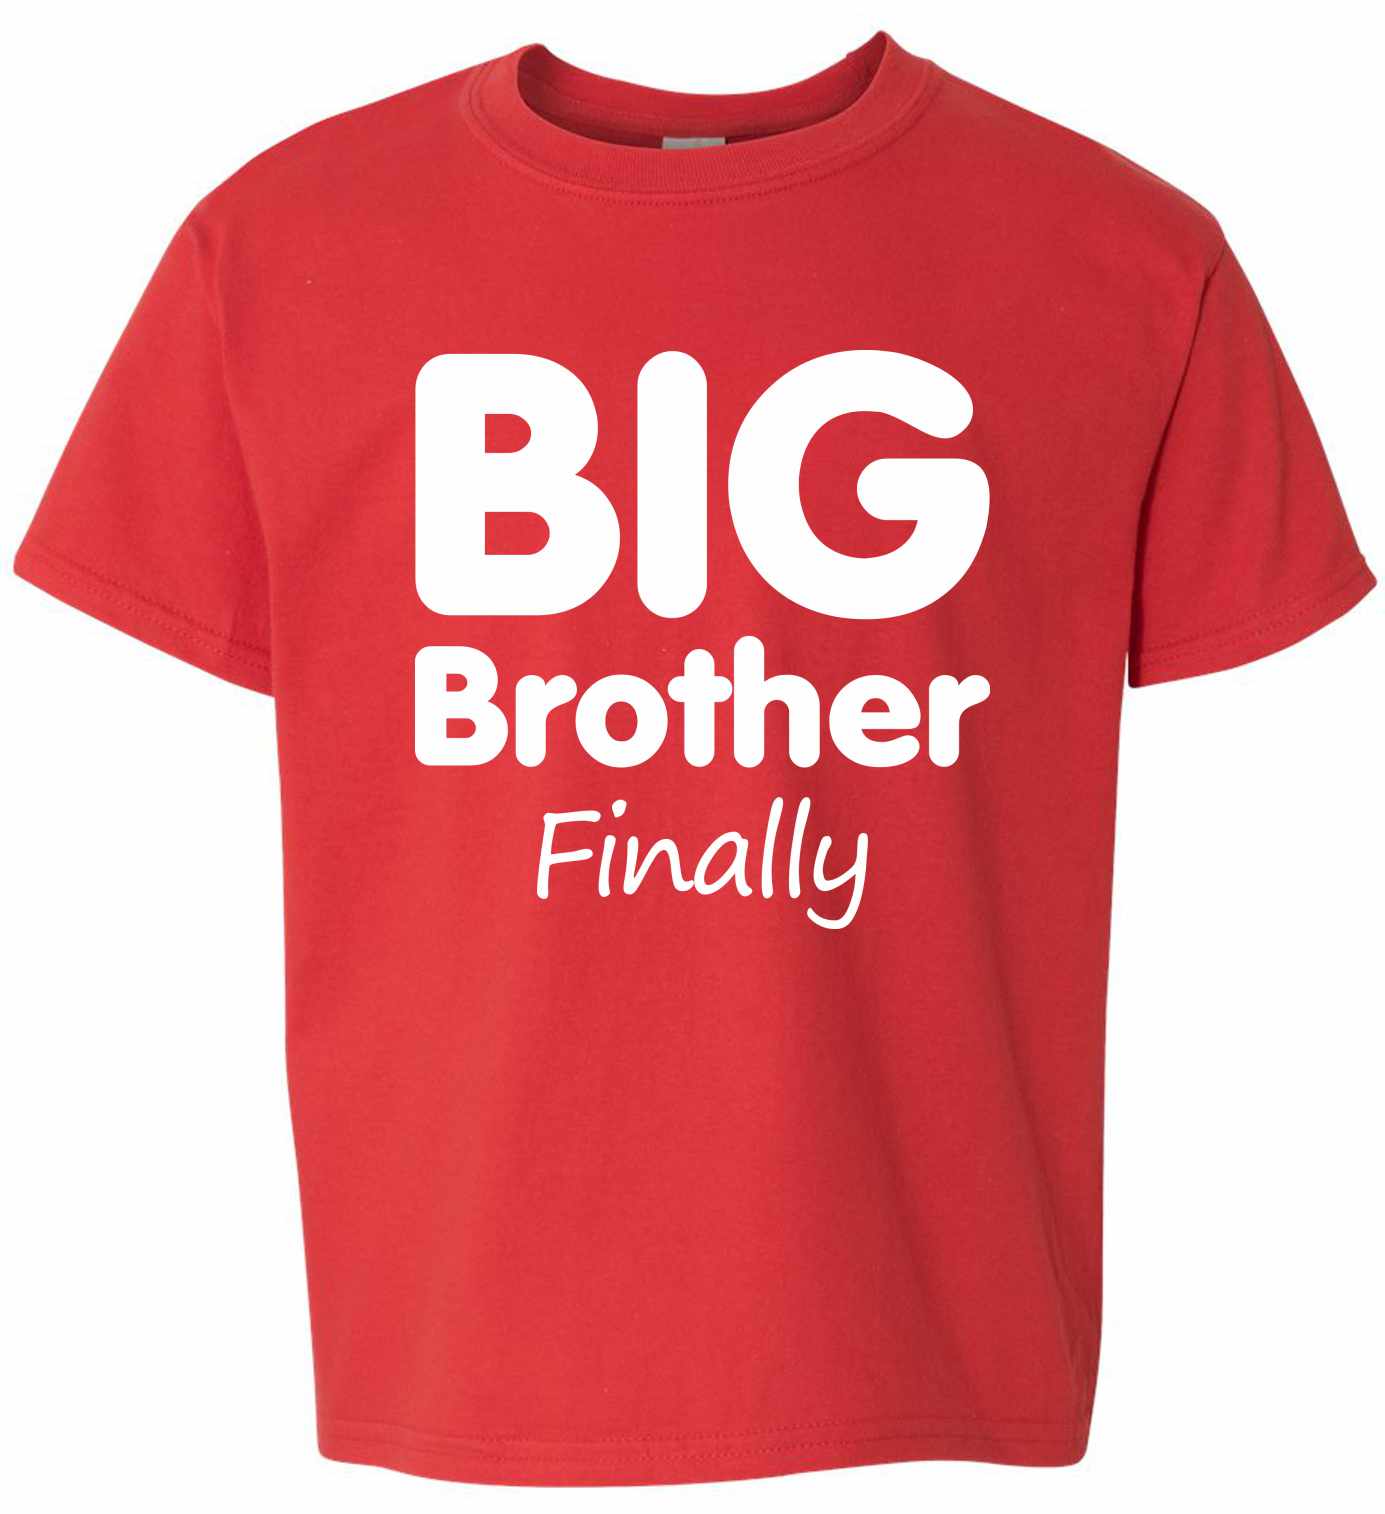 Big Brother Finally on Youth T-Shirt